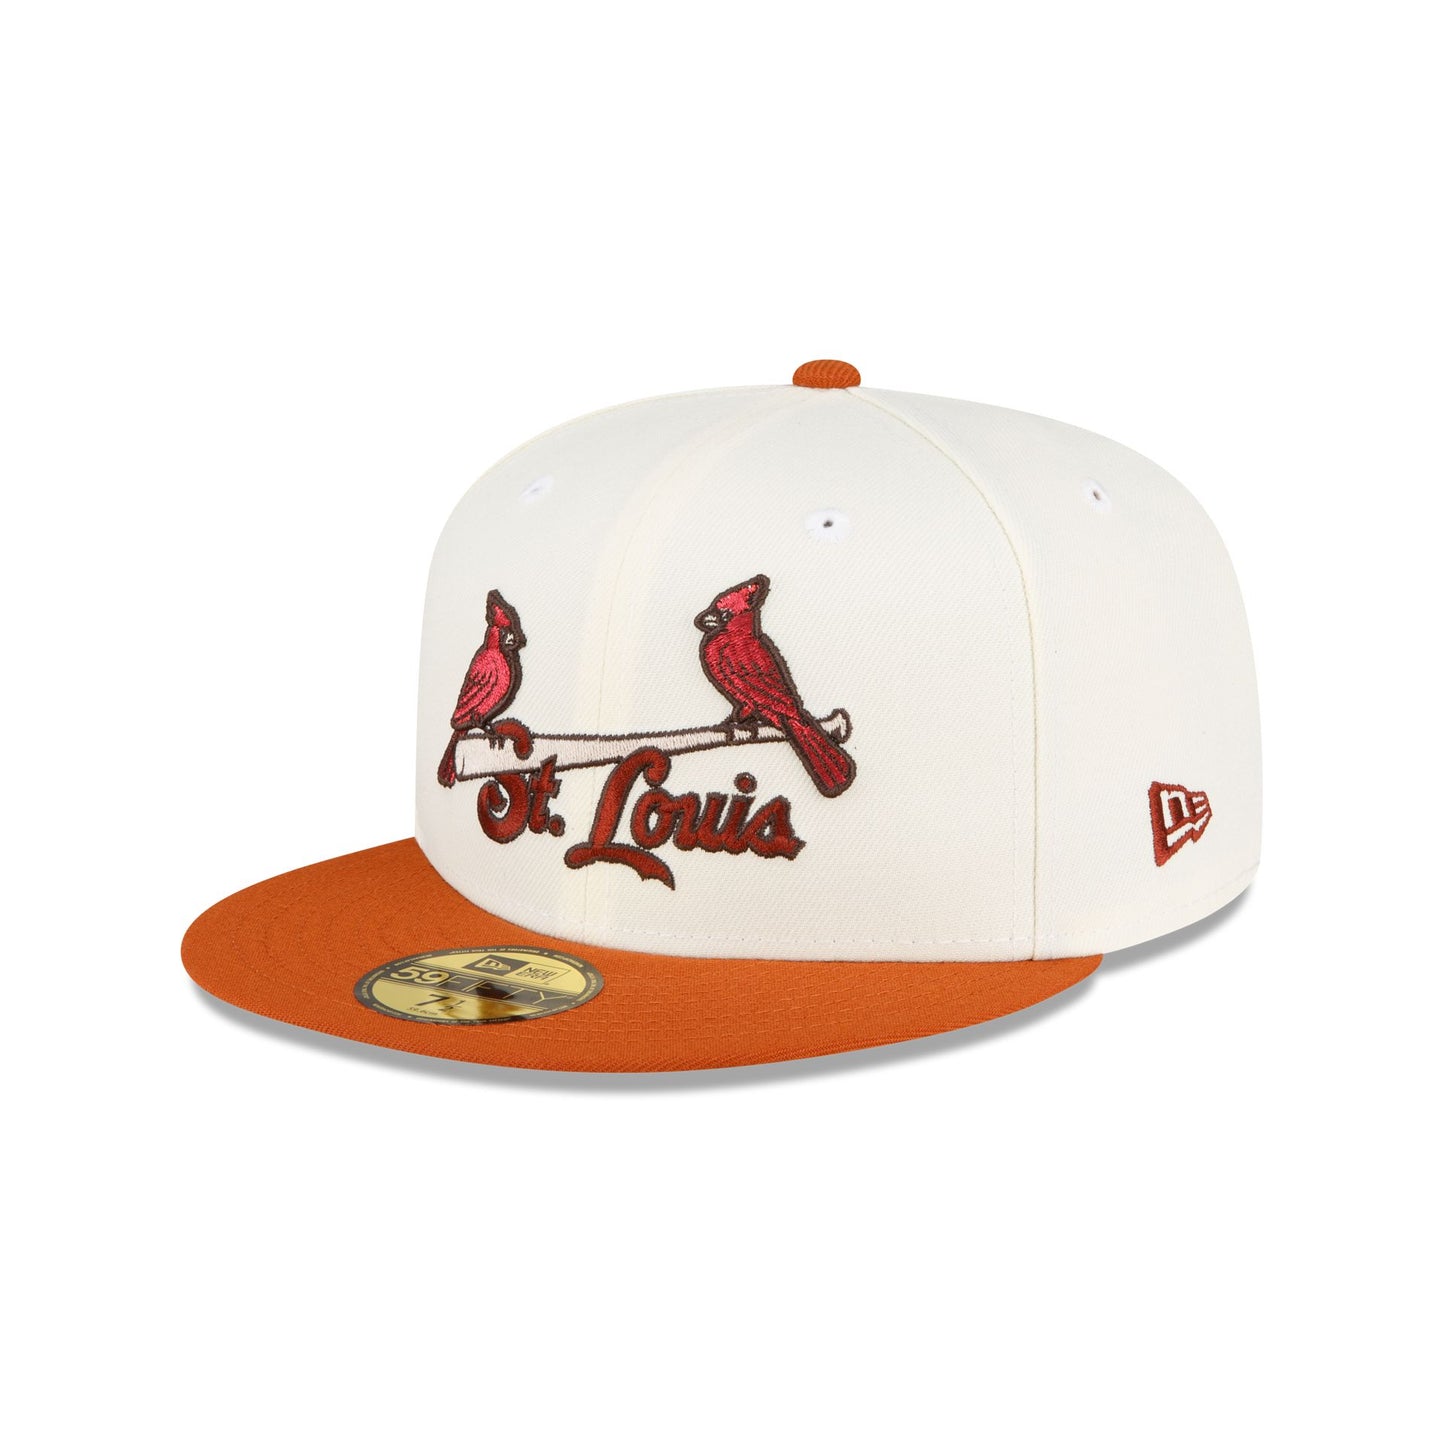 St. Louis Cardinals New Era Logo White 59FIFTY Fitted Hat - Sky Blue